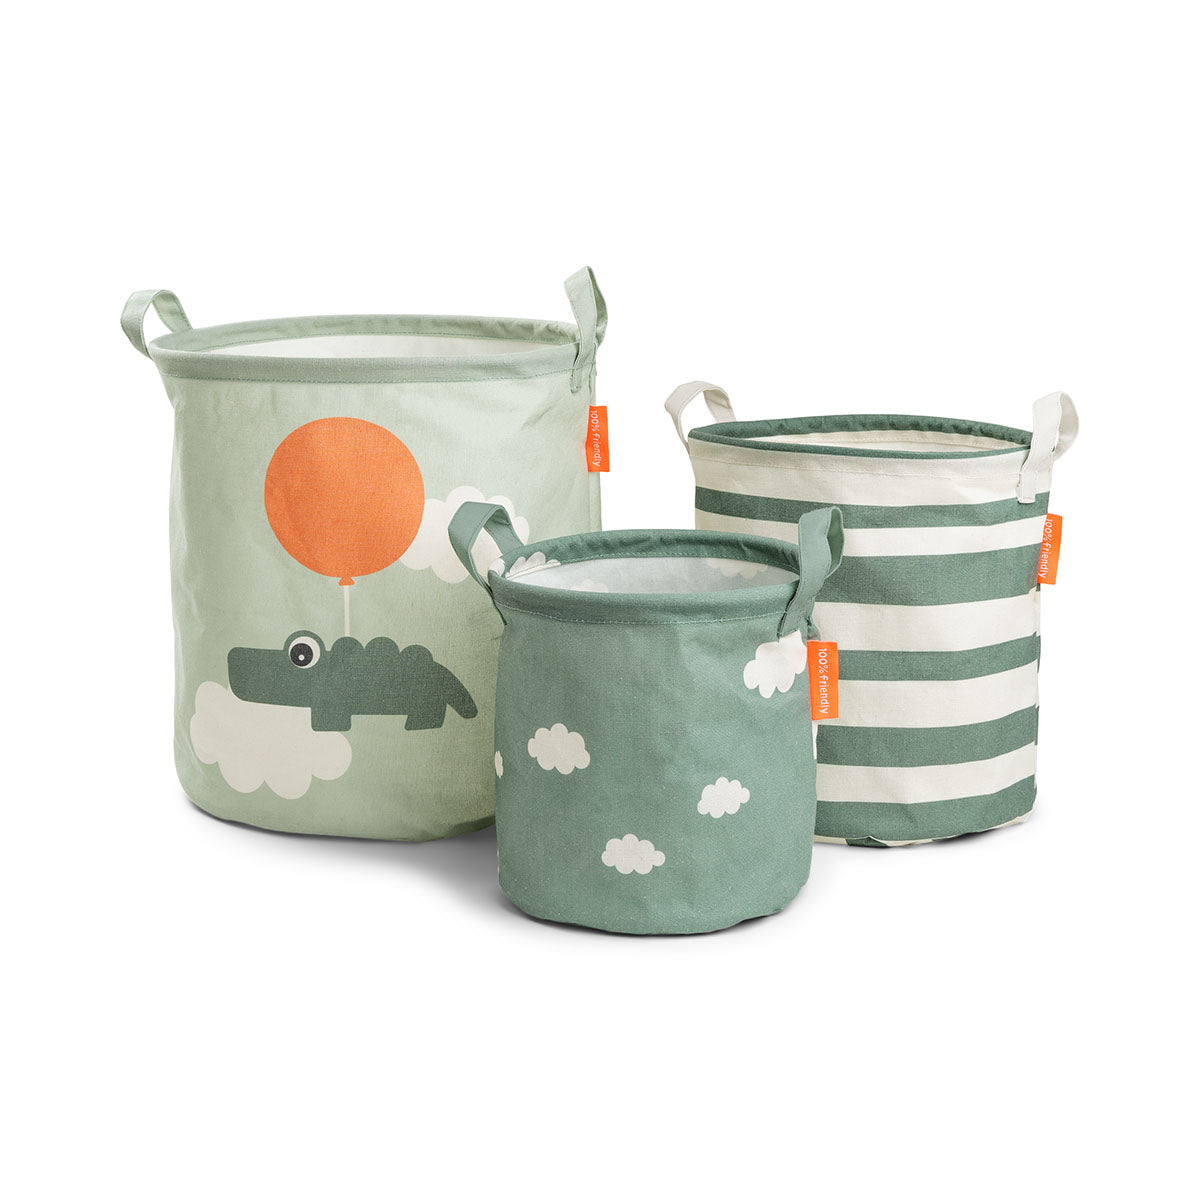 Done By Deer Storage basket set 3 pcs Happy clouds - Green - Tiny Tots Baby Store 